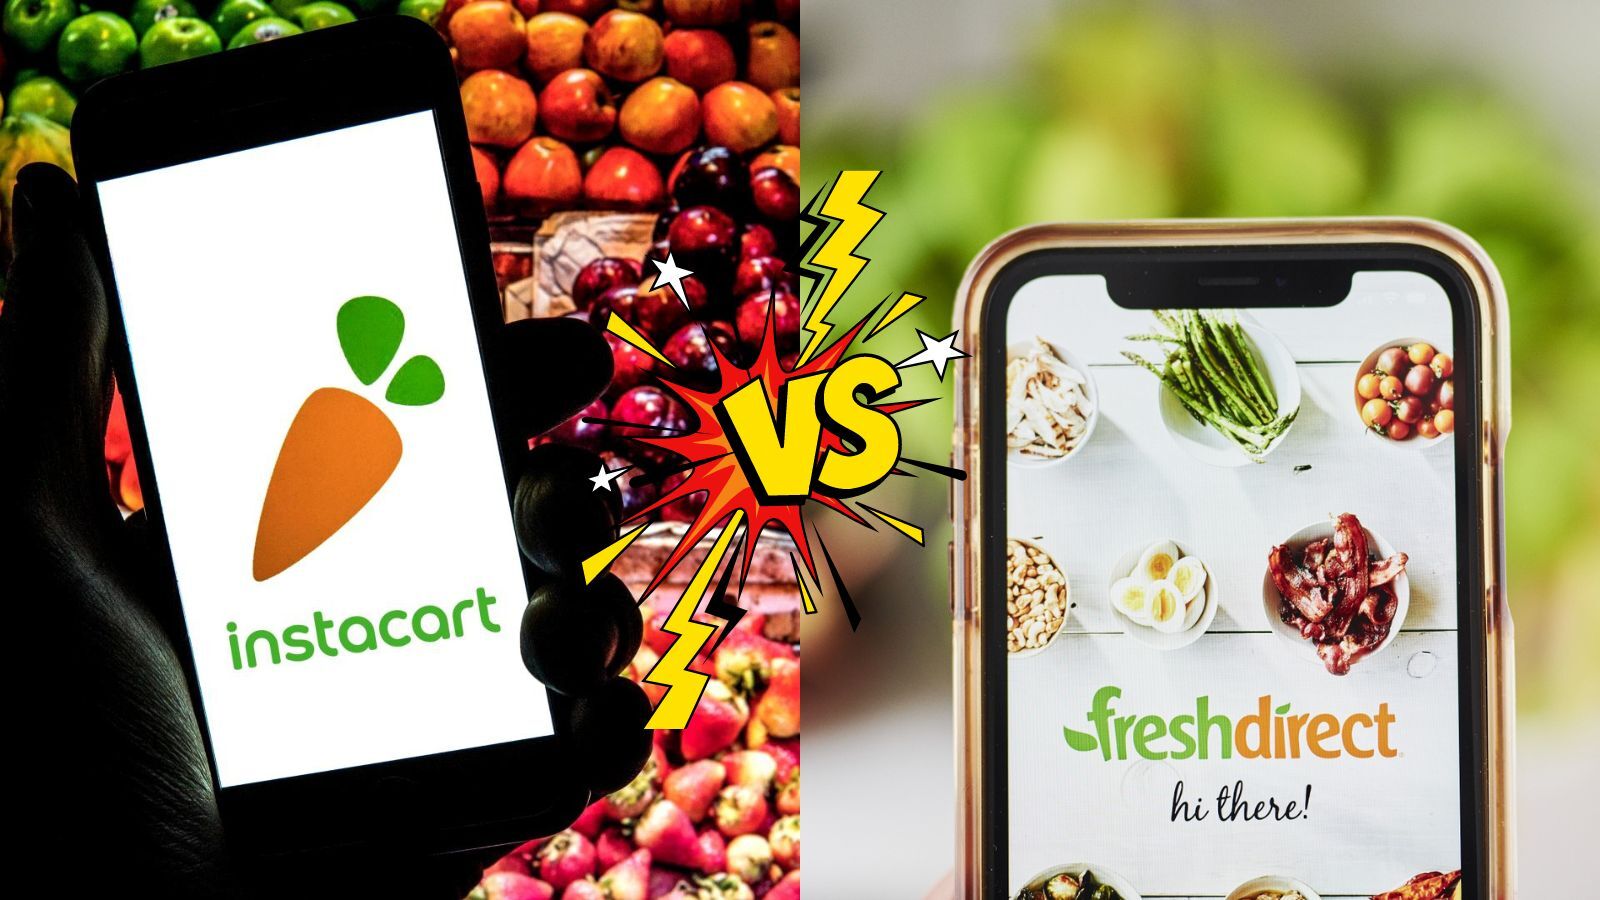 Instacart Vs FreshDirect: Partnerships, Coverage Area, Delivery Options, and Eco-Friendliness